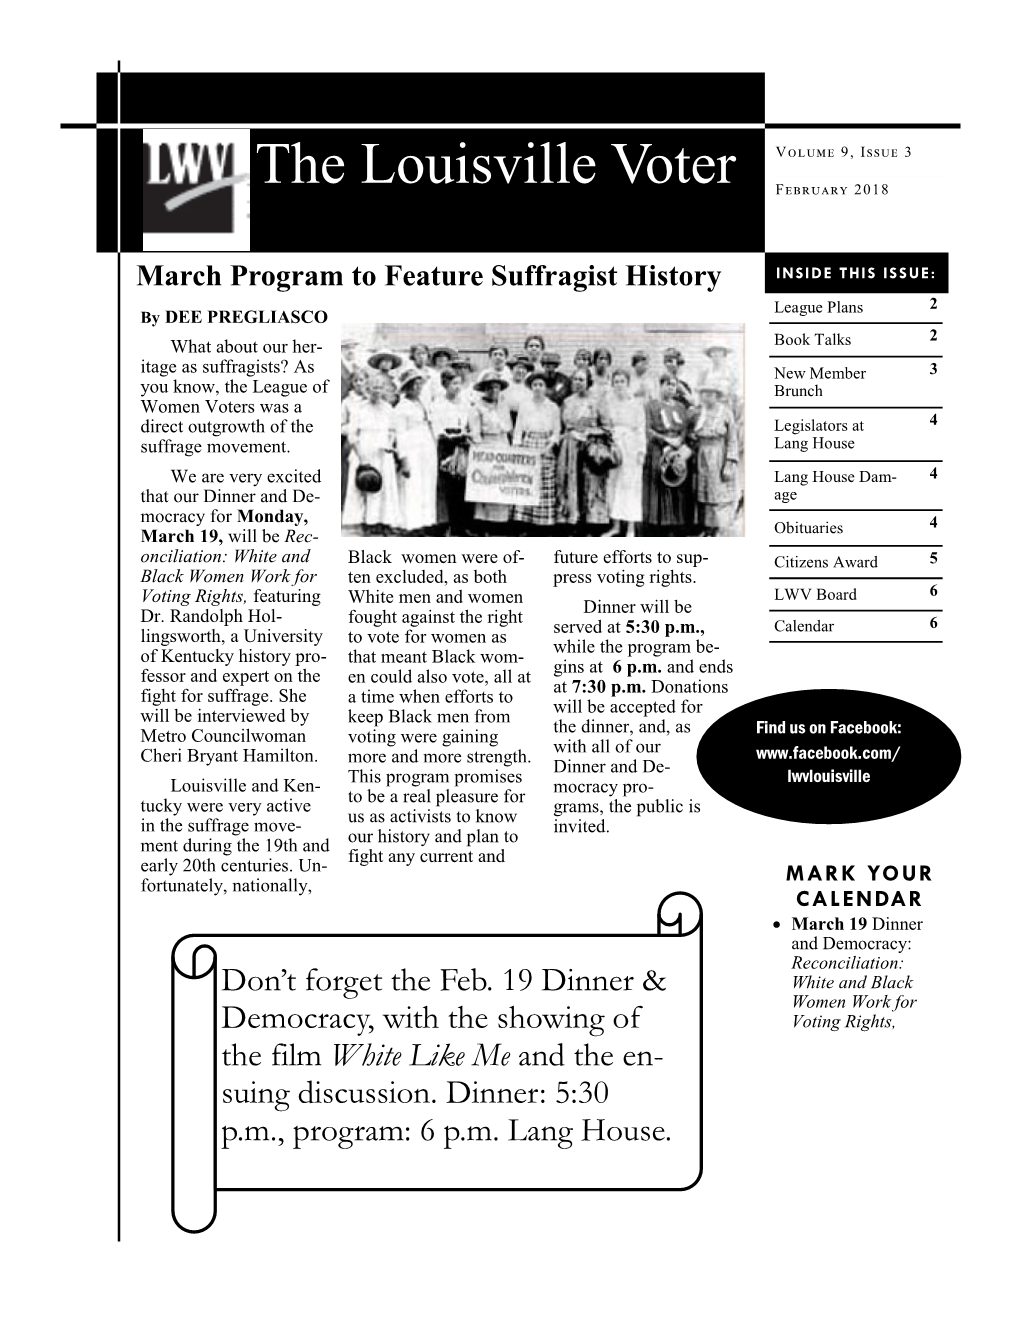 The Louisville Voter Volume 9, Issue 3 February 2018